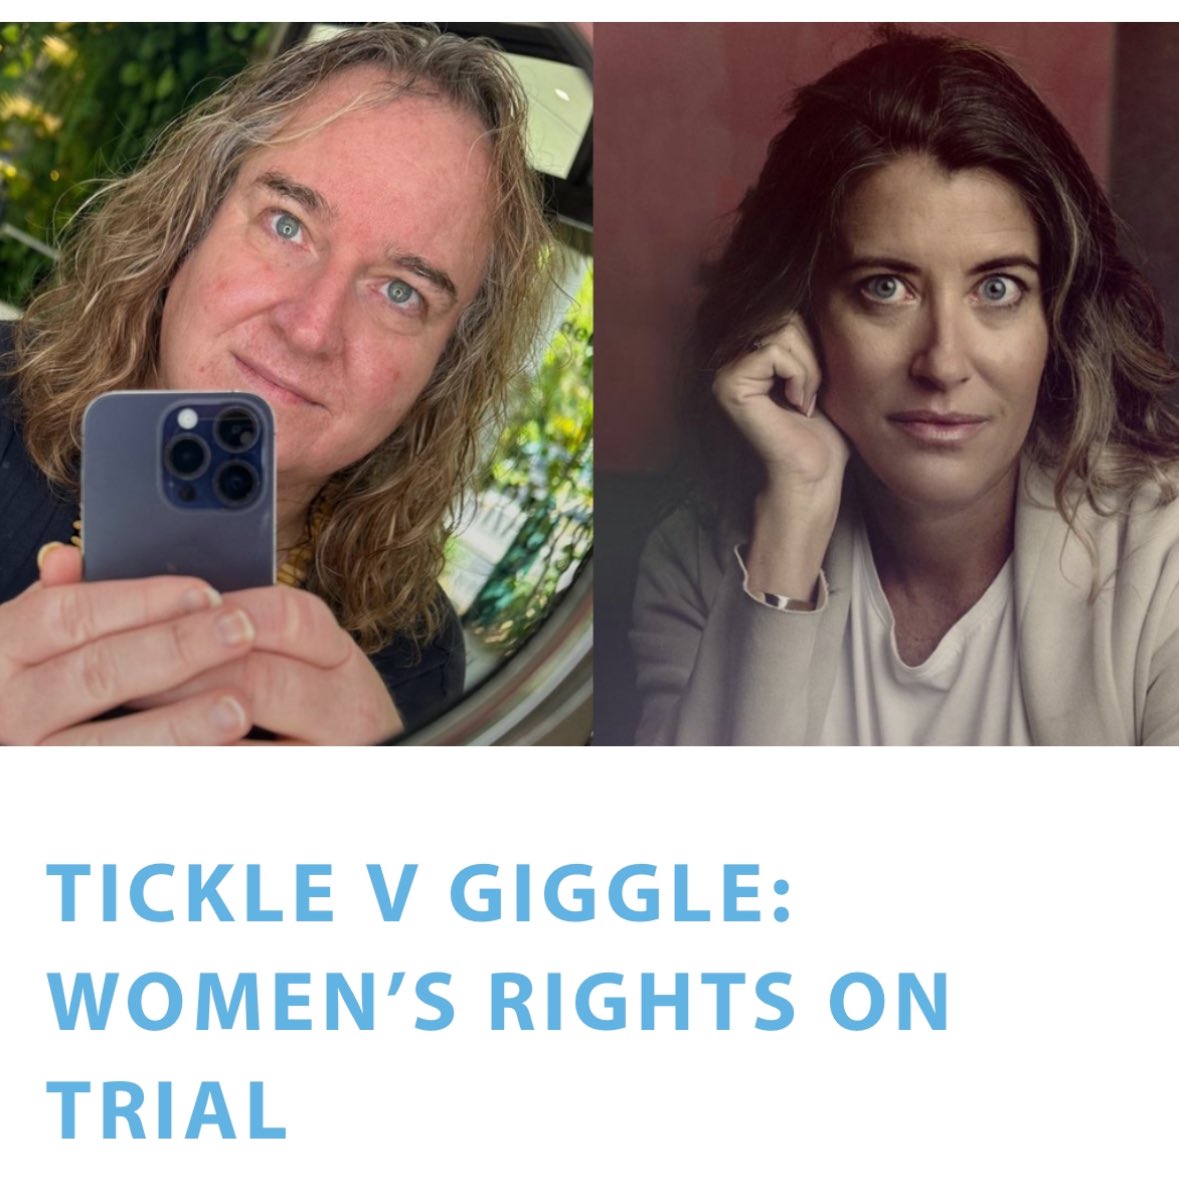 Tickle vs Giggle I will be providing live updates on the trial over the next 4 days on behalf of @WomensForumAust. Catch up on the case here: womensforumaustralia.org/tickle_v_giggl… @salltweets #ticklevGiggle